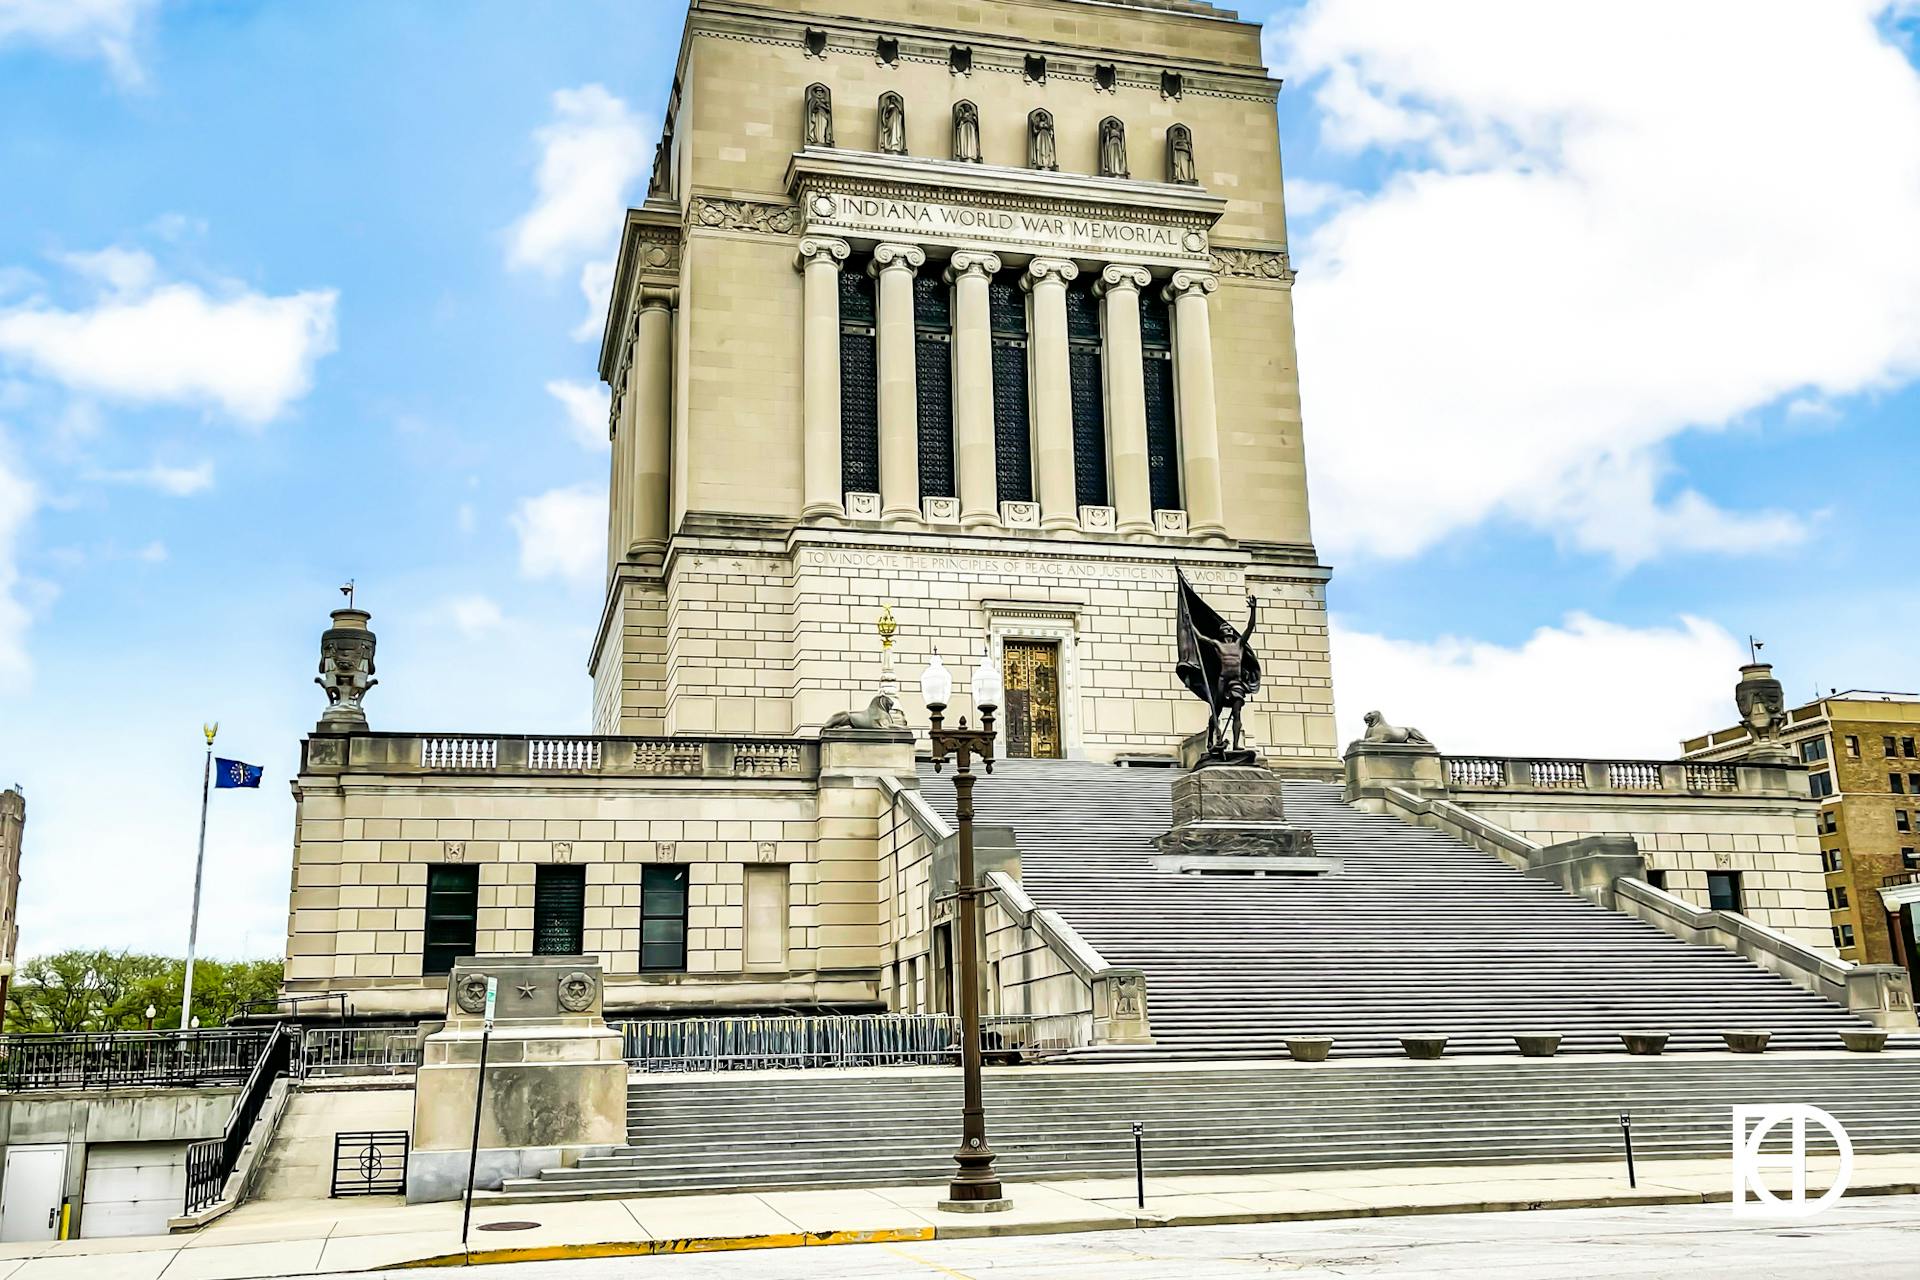 Exterior photo of entrance and statue outside of Indiana World War Memorial.